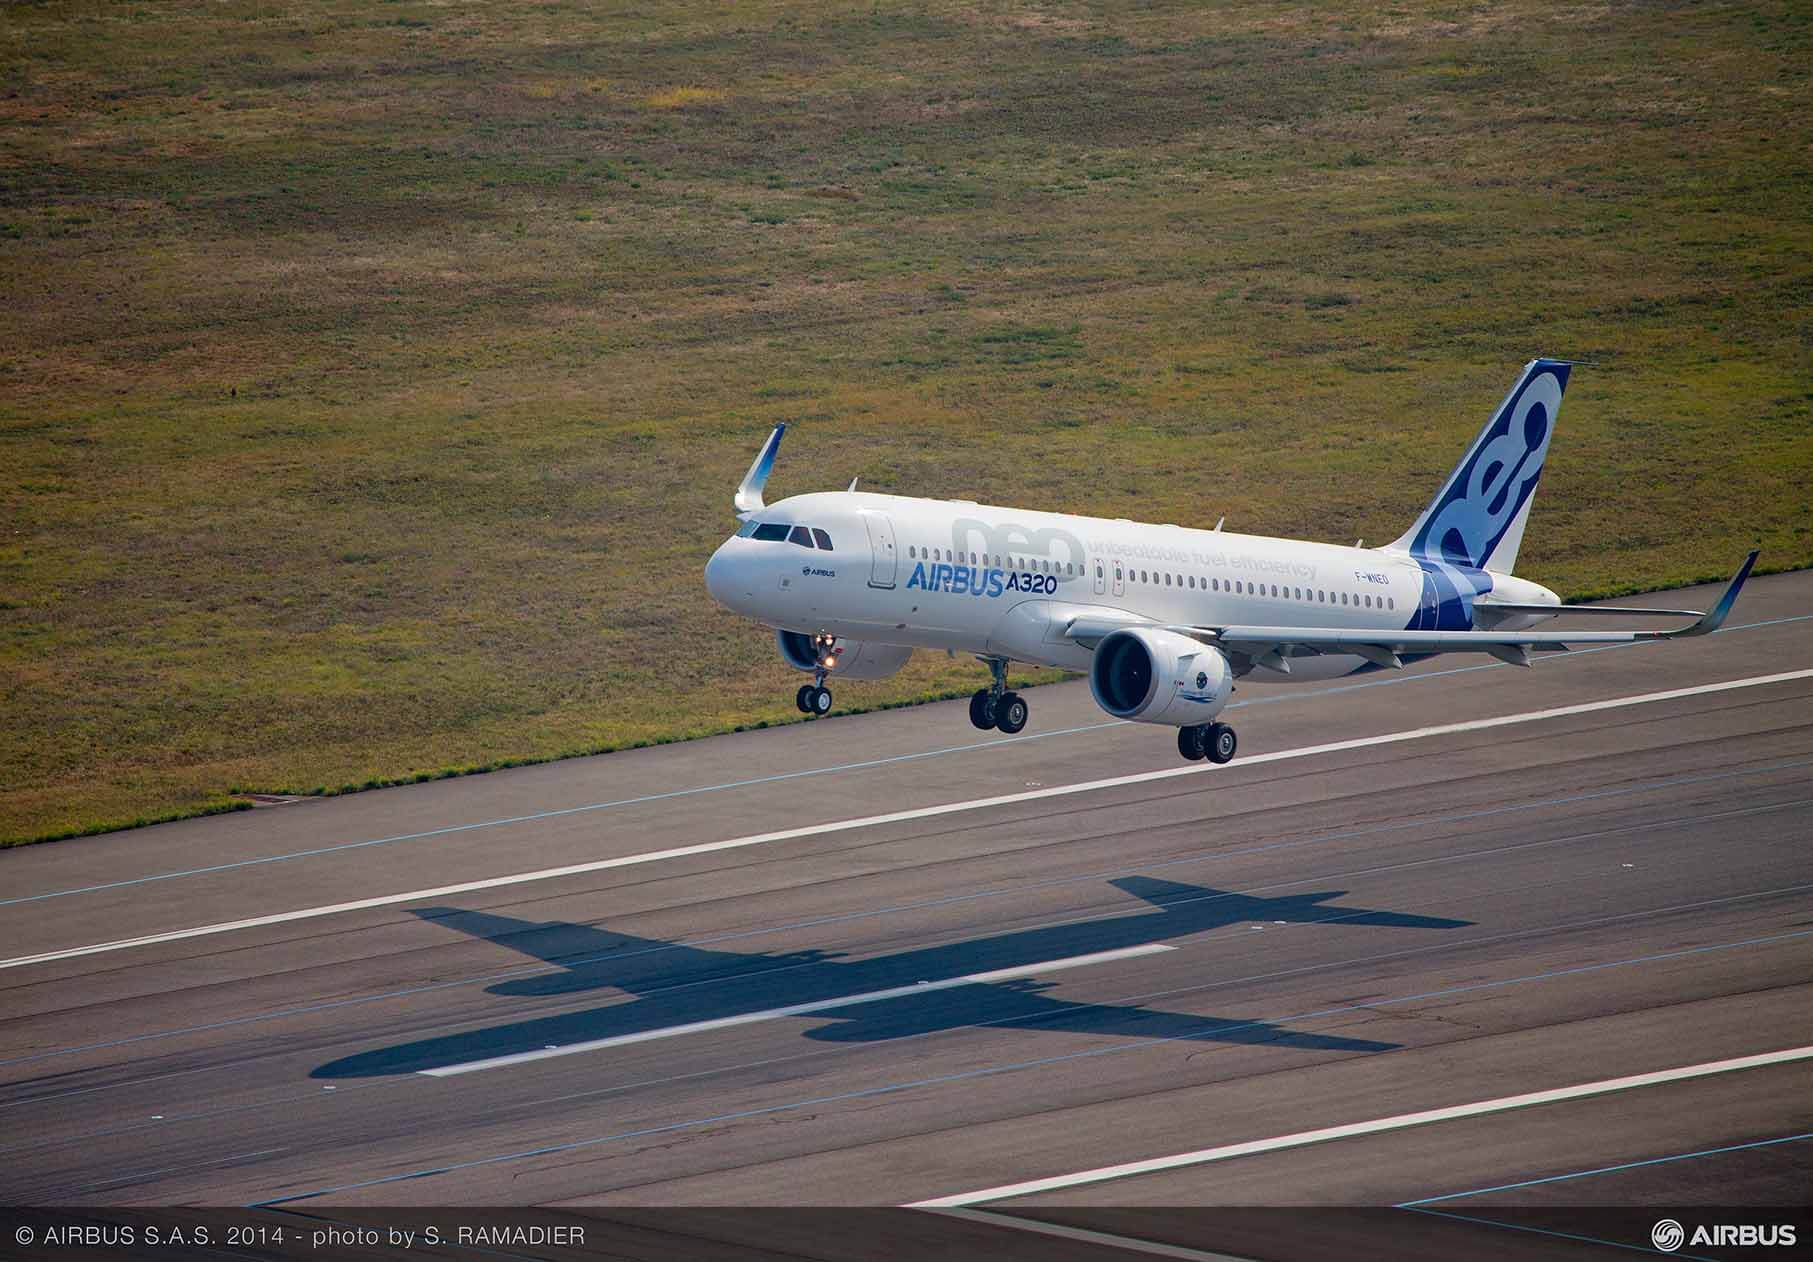 Airbus to open Flight Academy and extend training services to pilot cadets